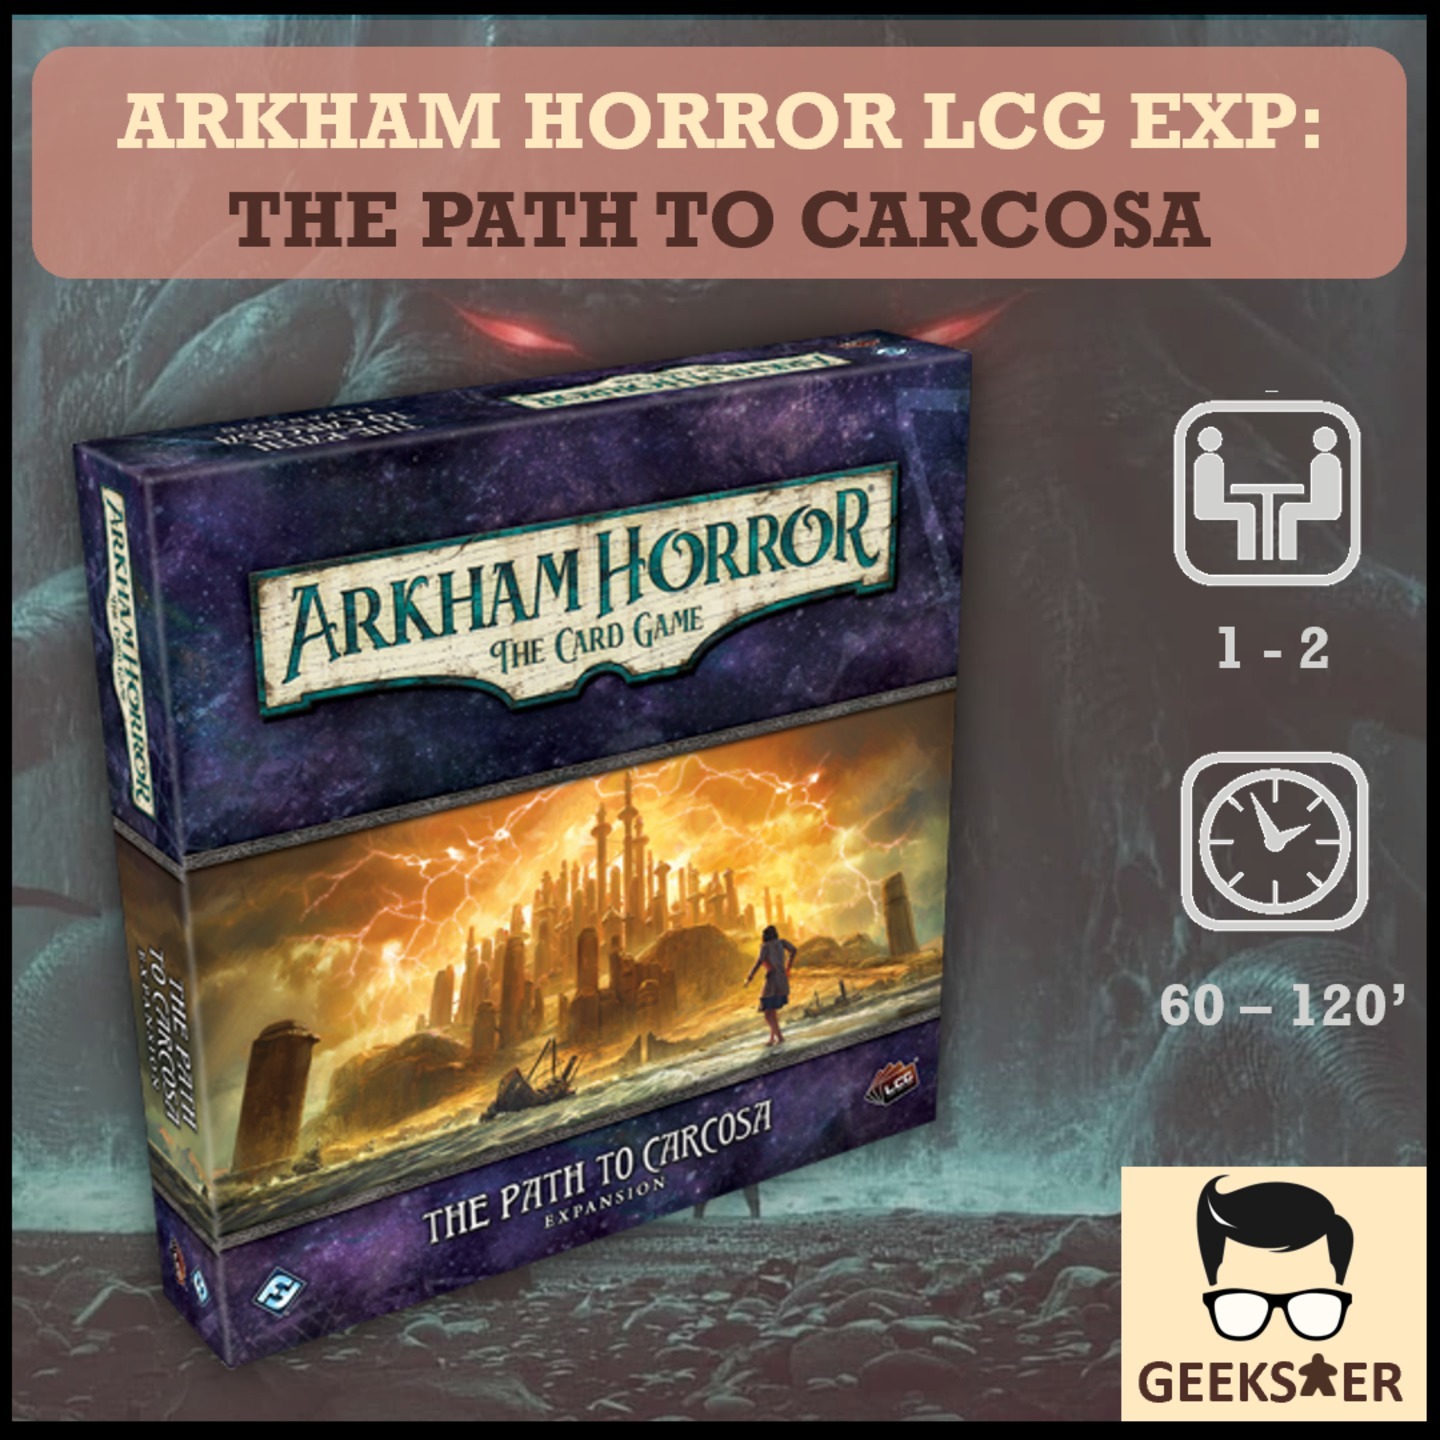 Arkham Horror LCG Exp The Path to Carcosa